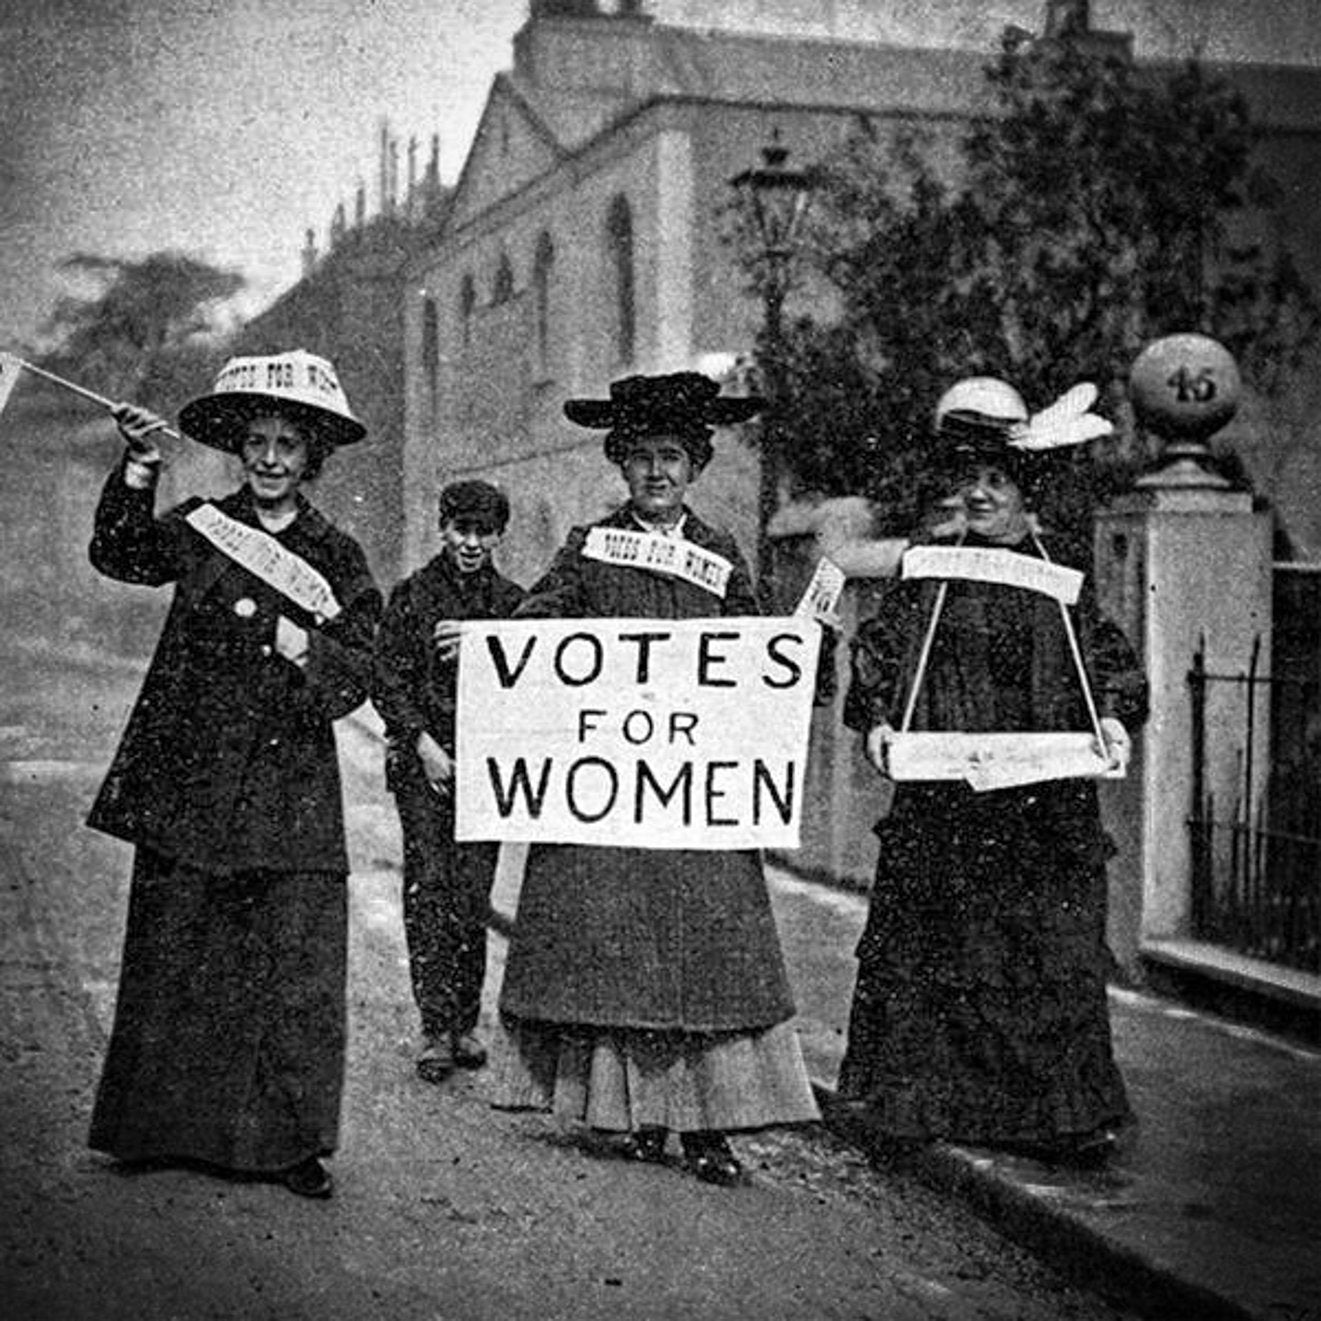 Suffragette Black and White Demonstration